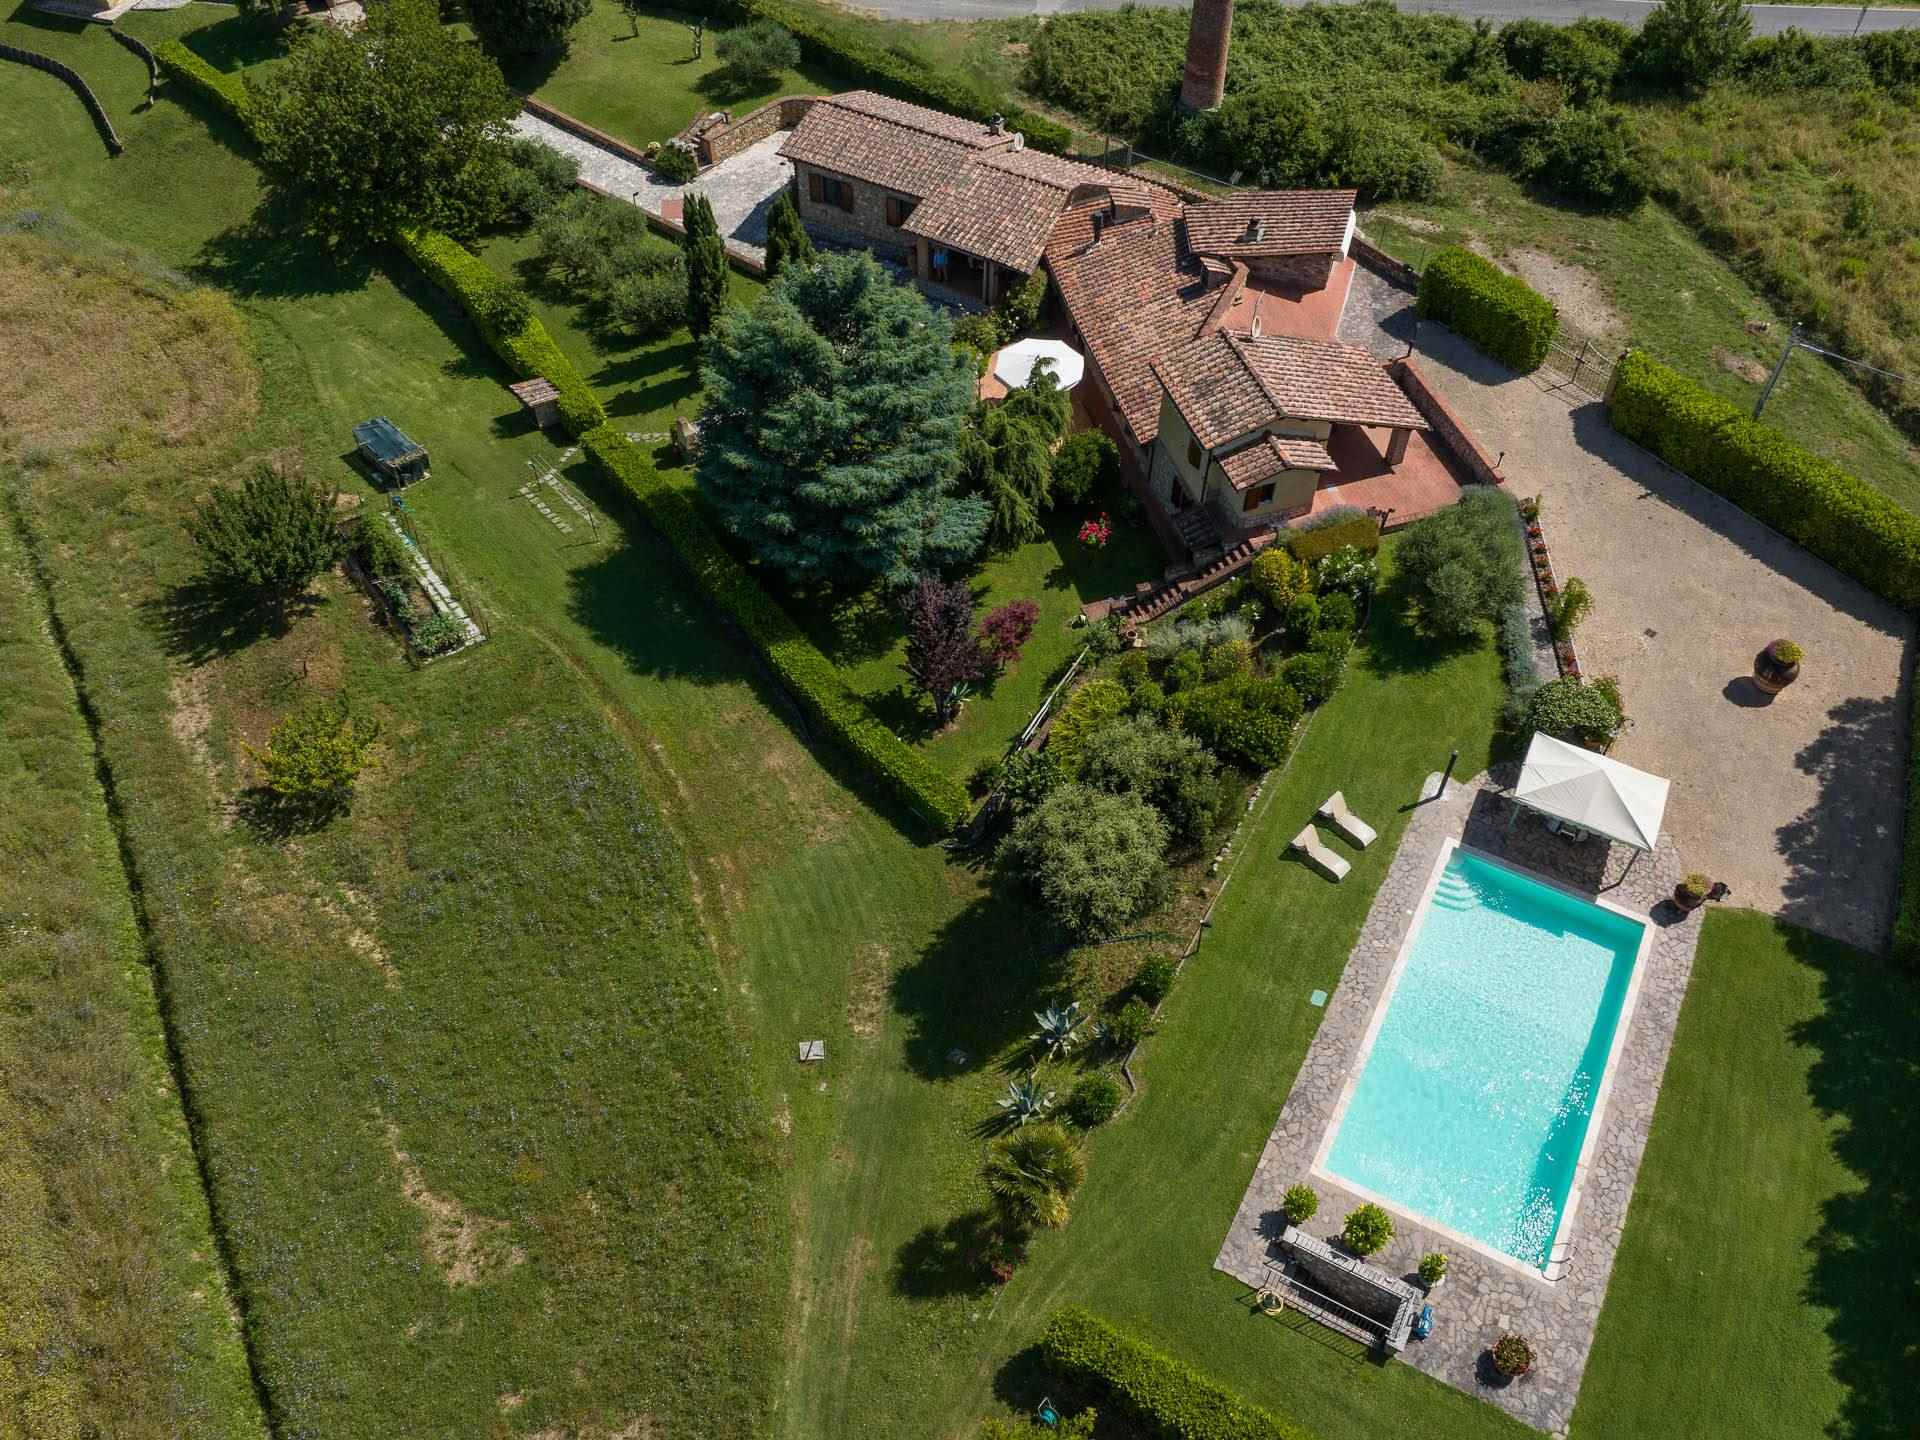 Villa with swimming pool, garden and one hectare of land with two lakes in an excellent position in the municipality of Casole d'Elsa at 300 m asl, 